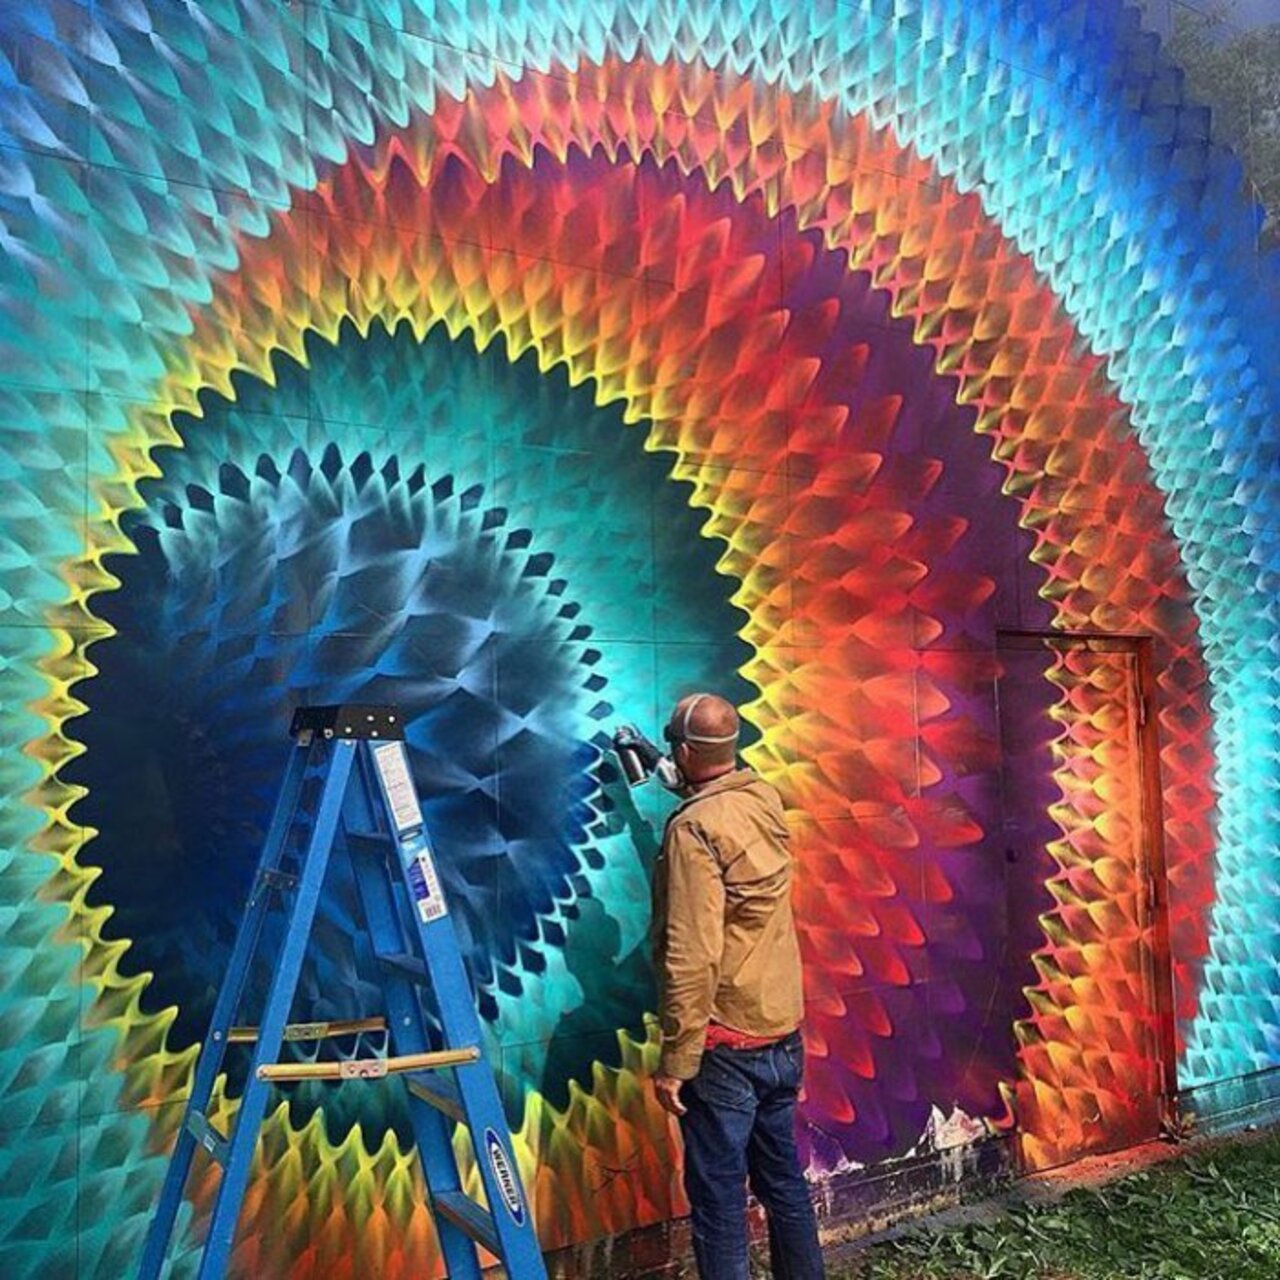 #StreetArt Rainbow – Creative Colours | Be ▲rtist - Be ▲rt https://beartistbeart.com/2016/06/23/streetart-rainbow-creative-colours/?utm_campaign=crowdfire&utm_content=crowdfire&utm_medium=social&utm_source=twitter https://t.co/ck7grVenm9